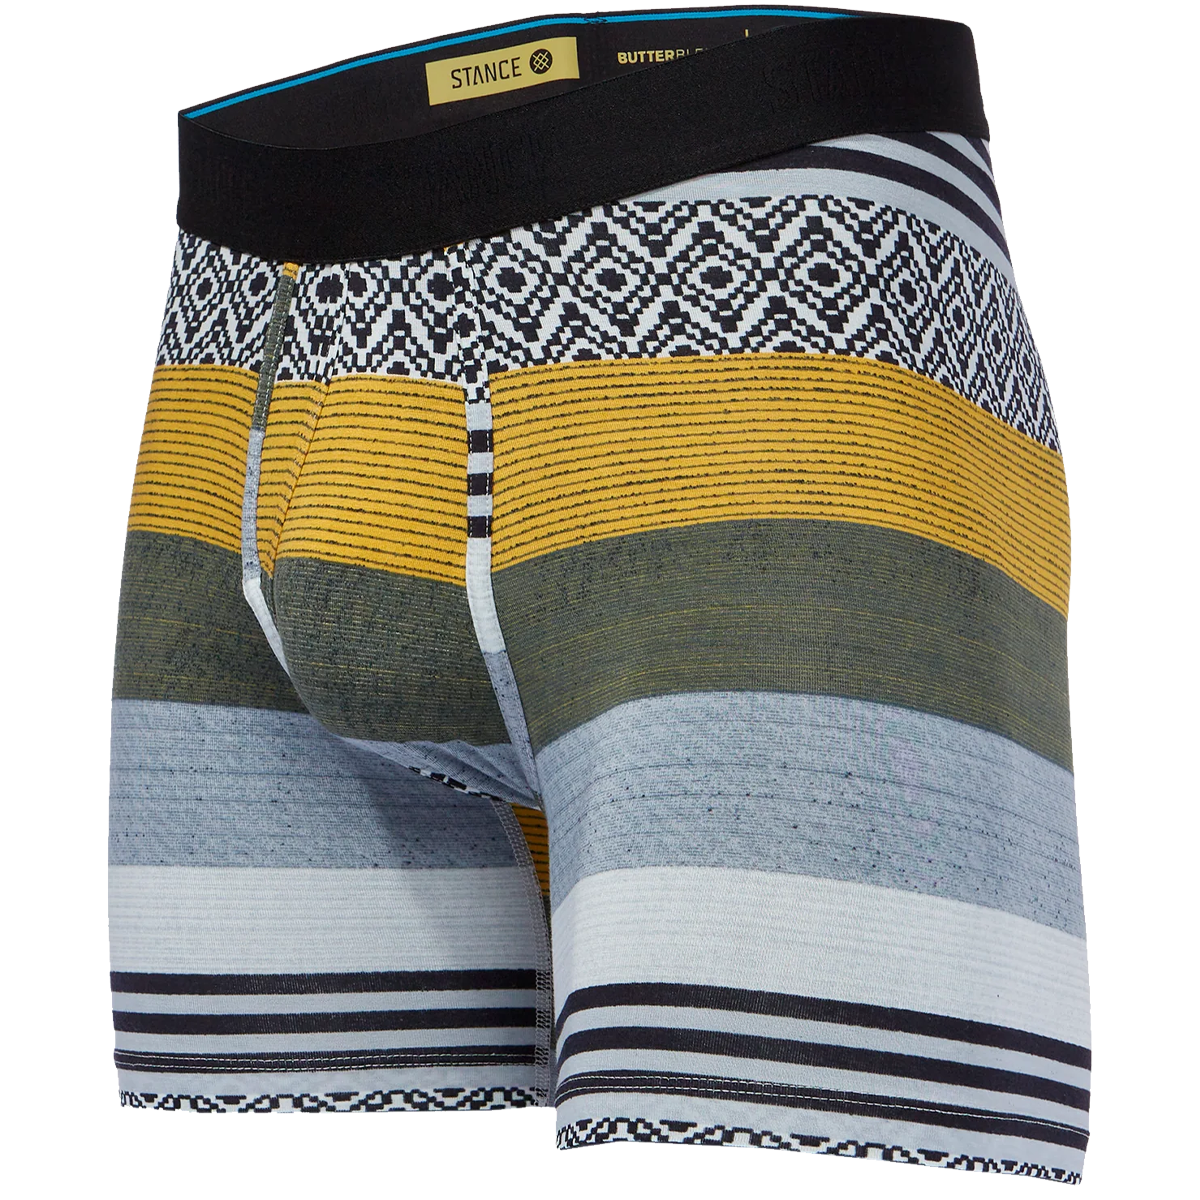 Anza Boxer Brief with Wholester alternate view